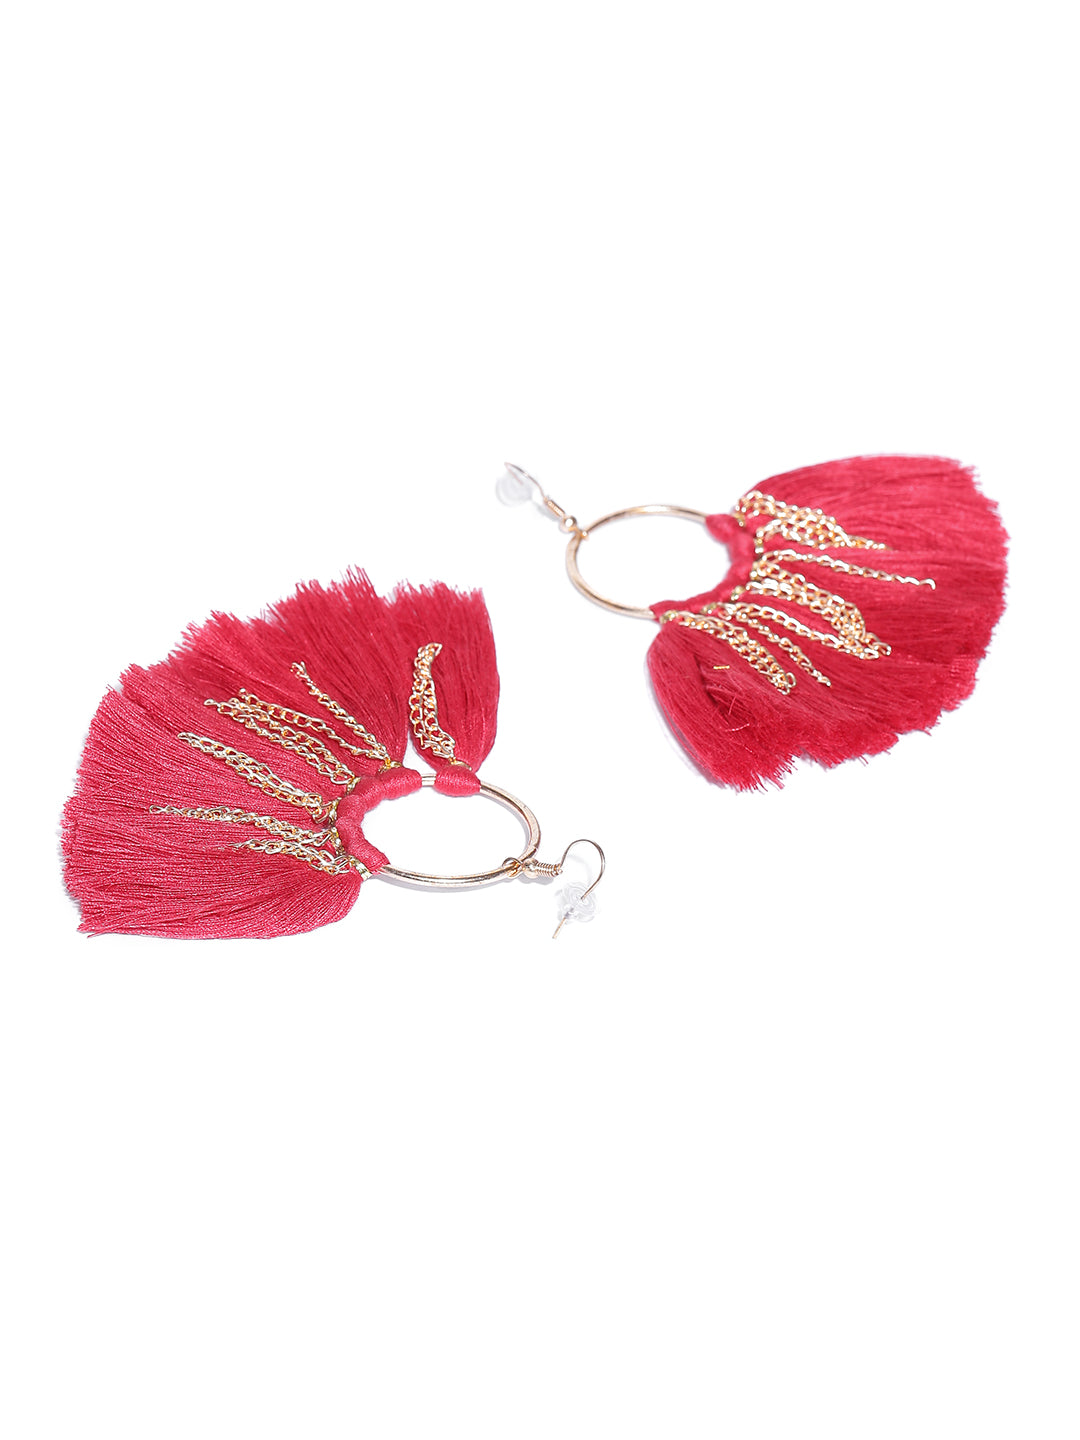 Blueberry red and gold tassel earrings